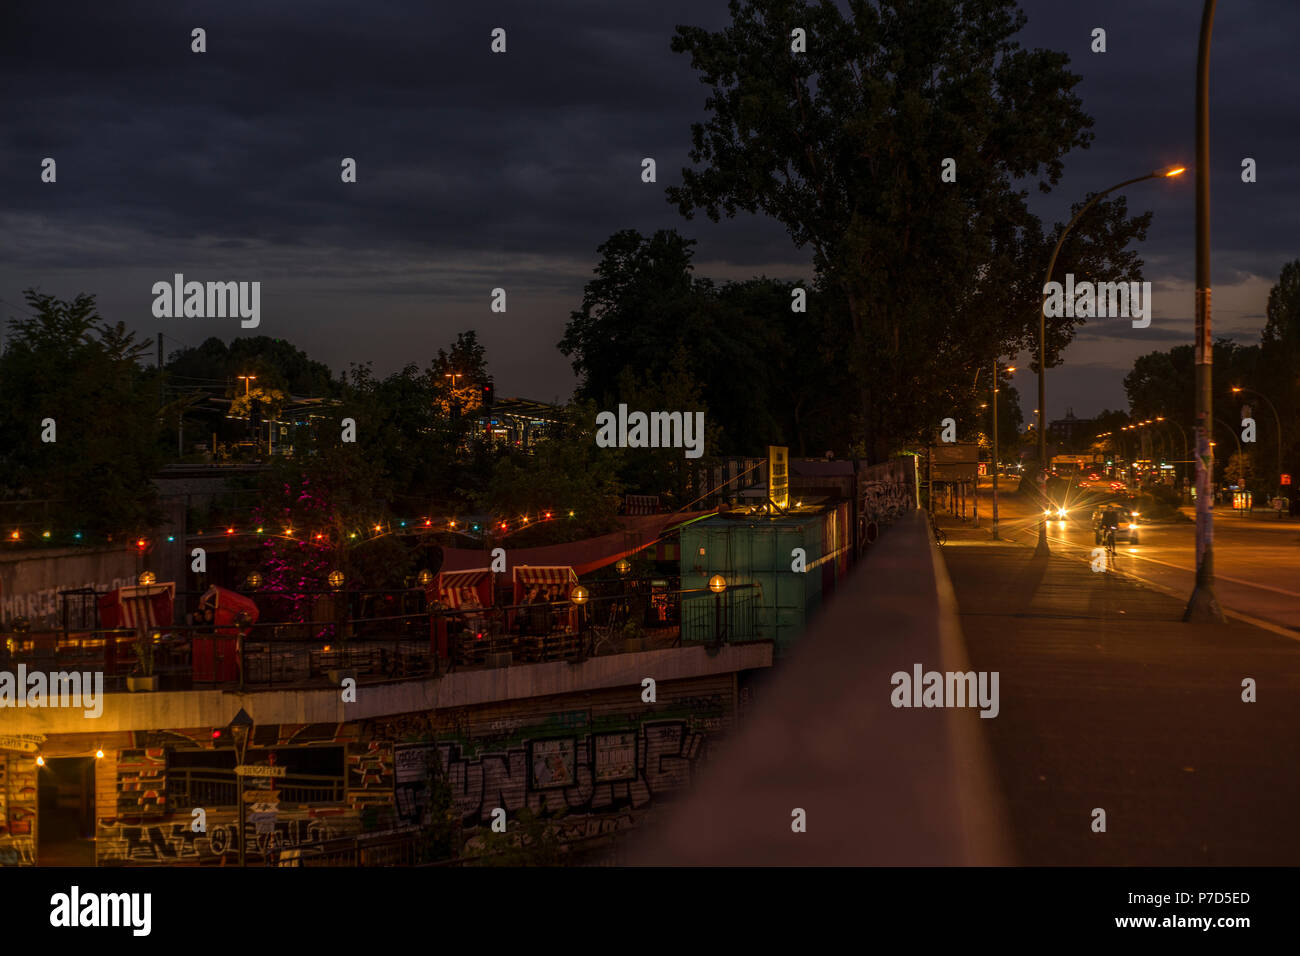 A look at Else Open Air, a club and biergarten in Treptow, at night, Berlin 2016. Stock Photo